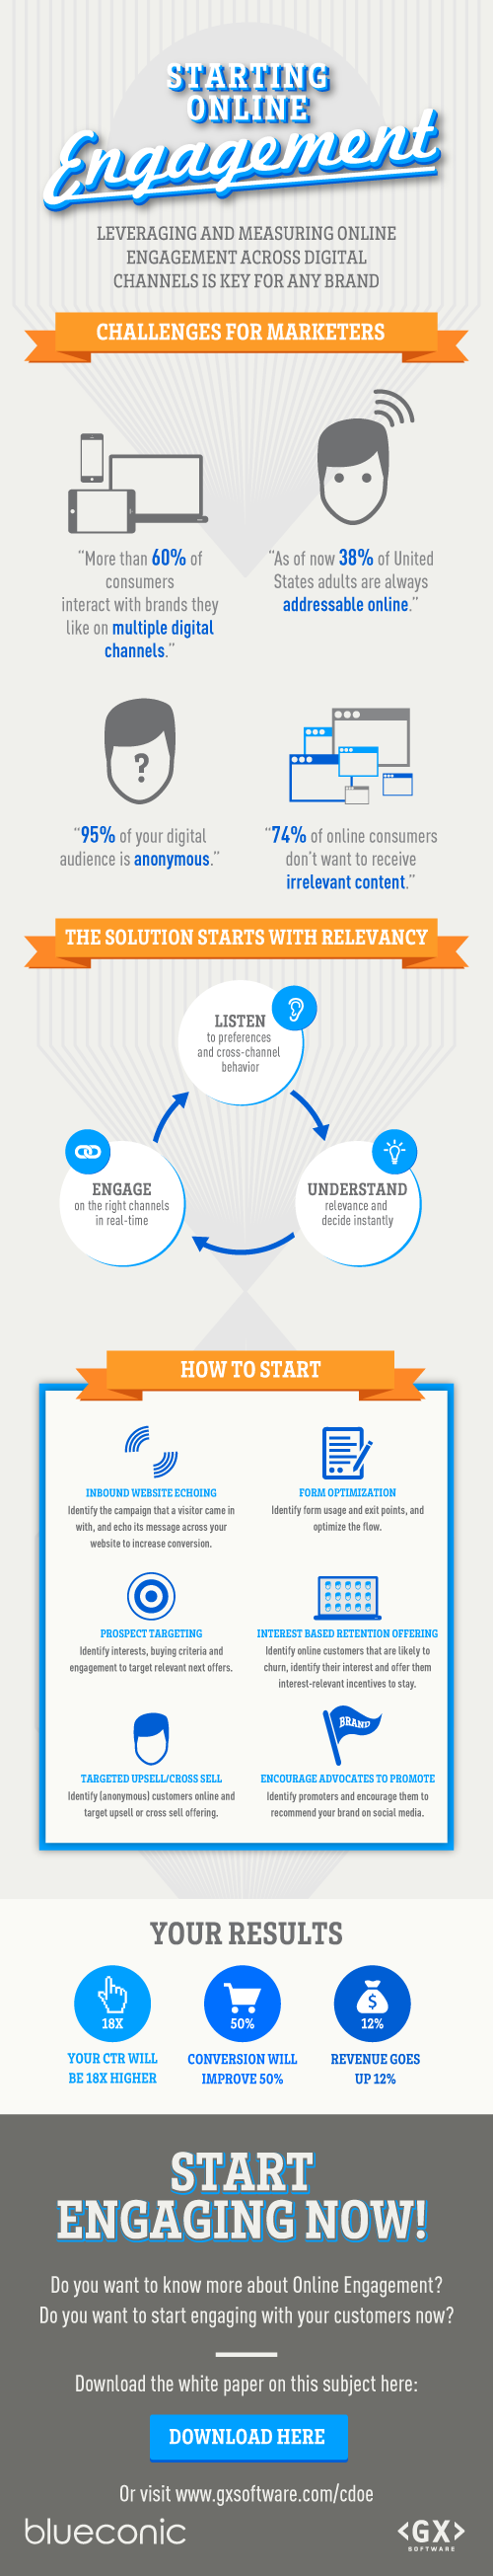 Infographic: Starting Online Engagement